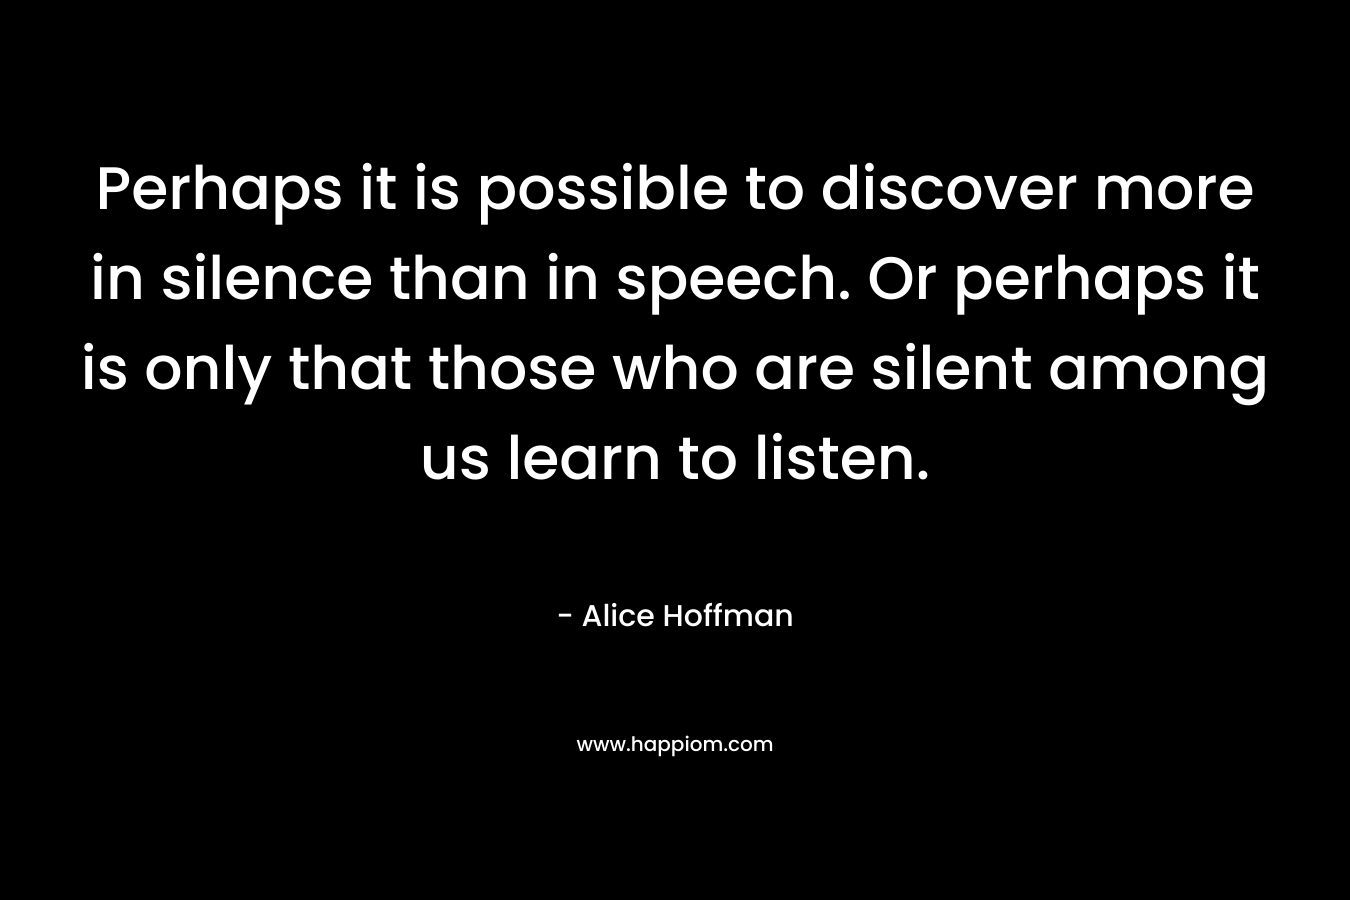 Perhaps it is possible to discover more in silence than in speech. Or perhaps it is only that those who are silent among us learn to listen.